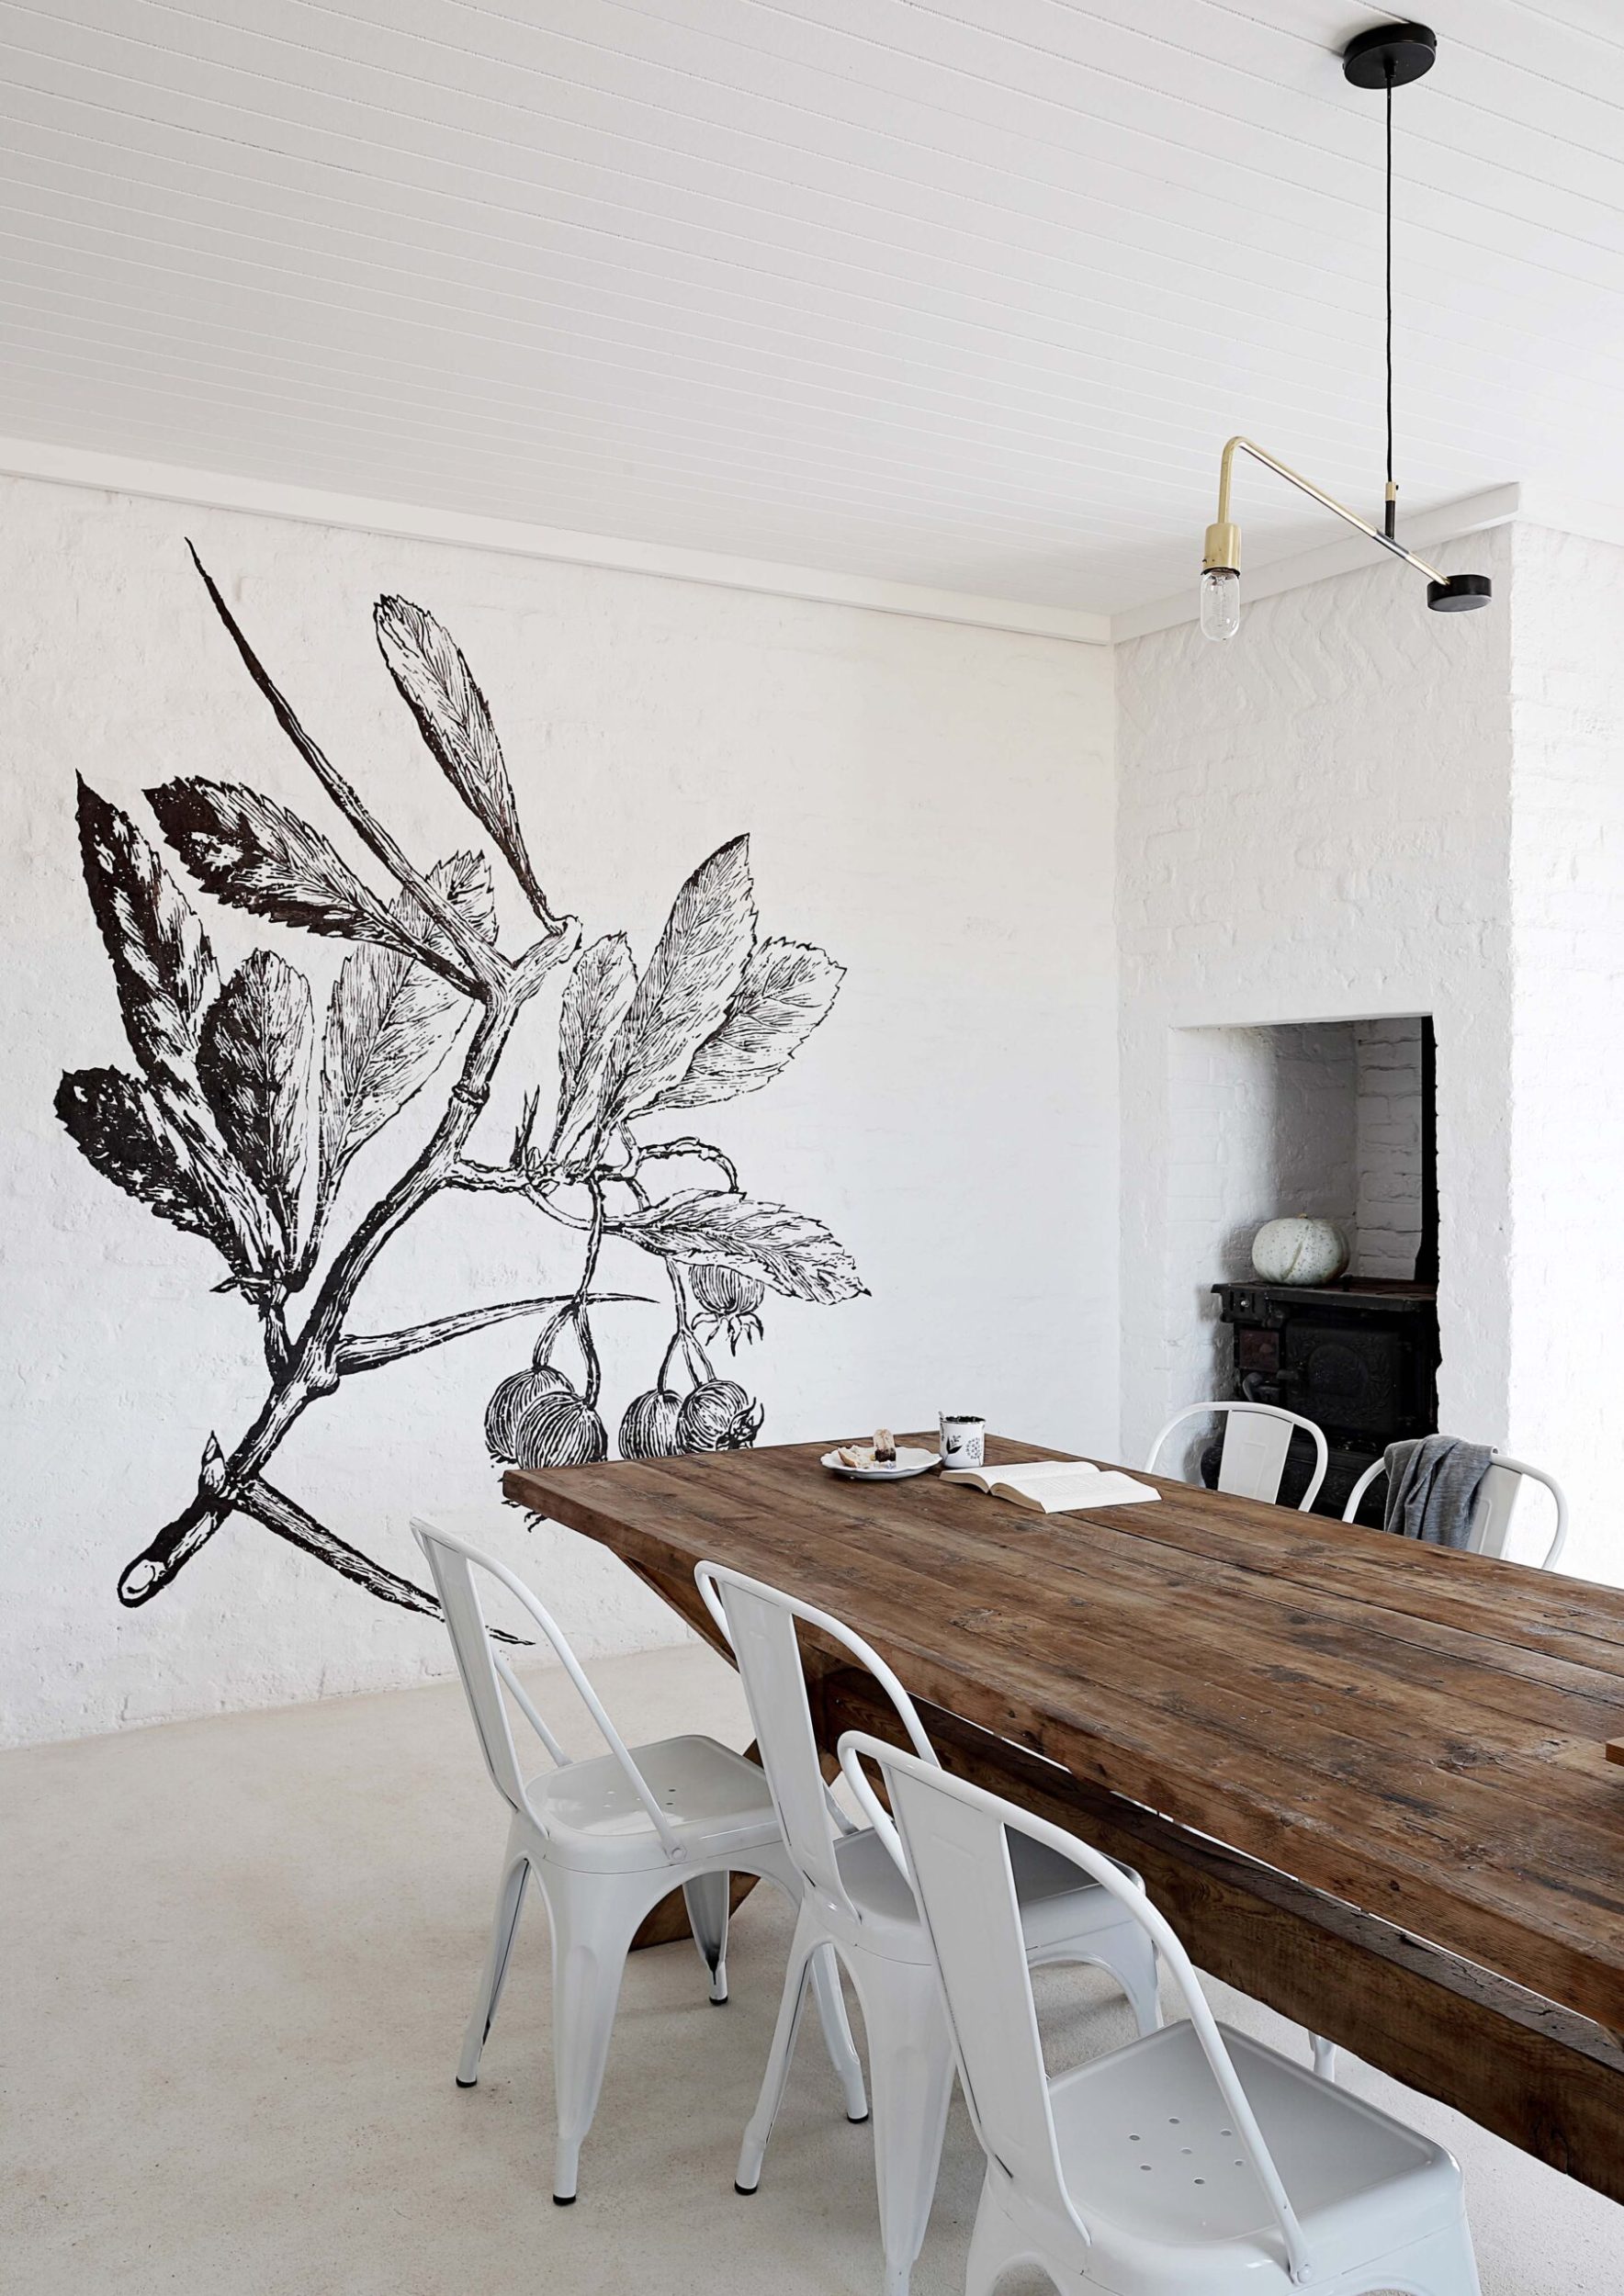 A dining room with white walls and a painted black and white mural of a tree branch